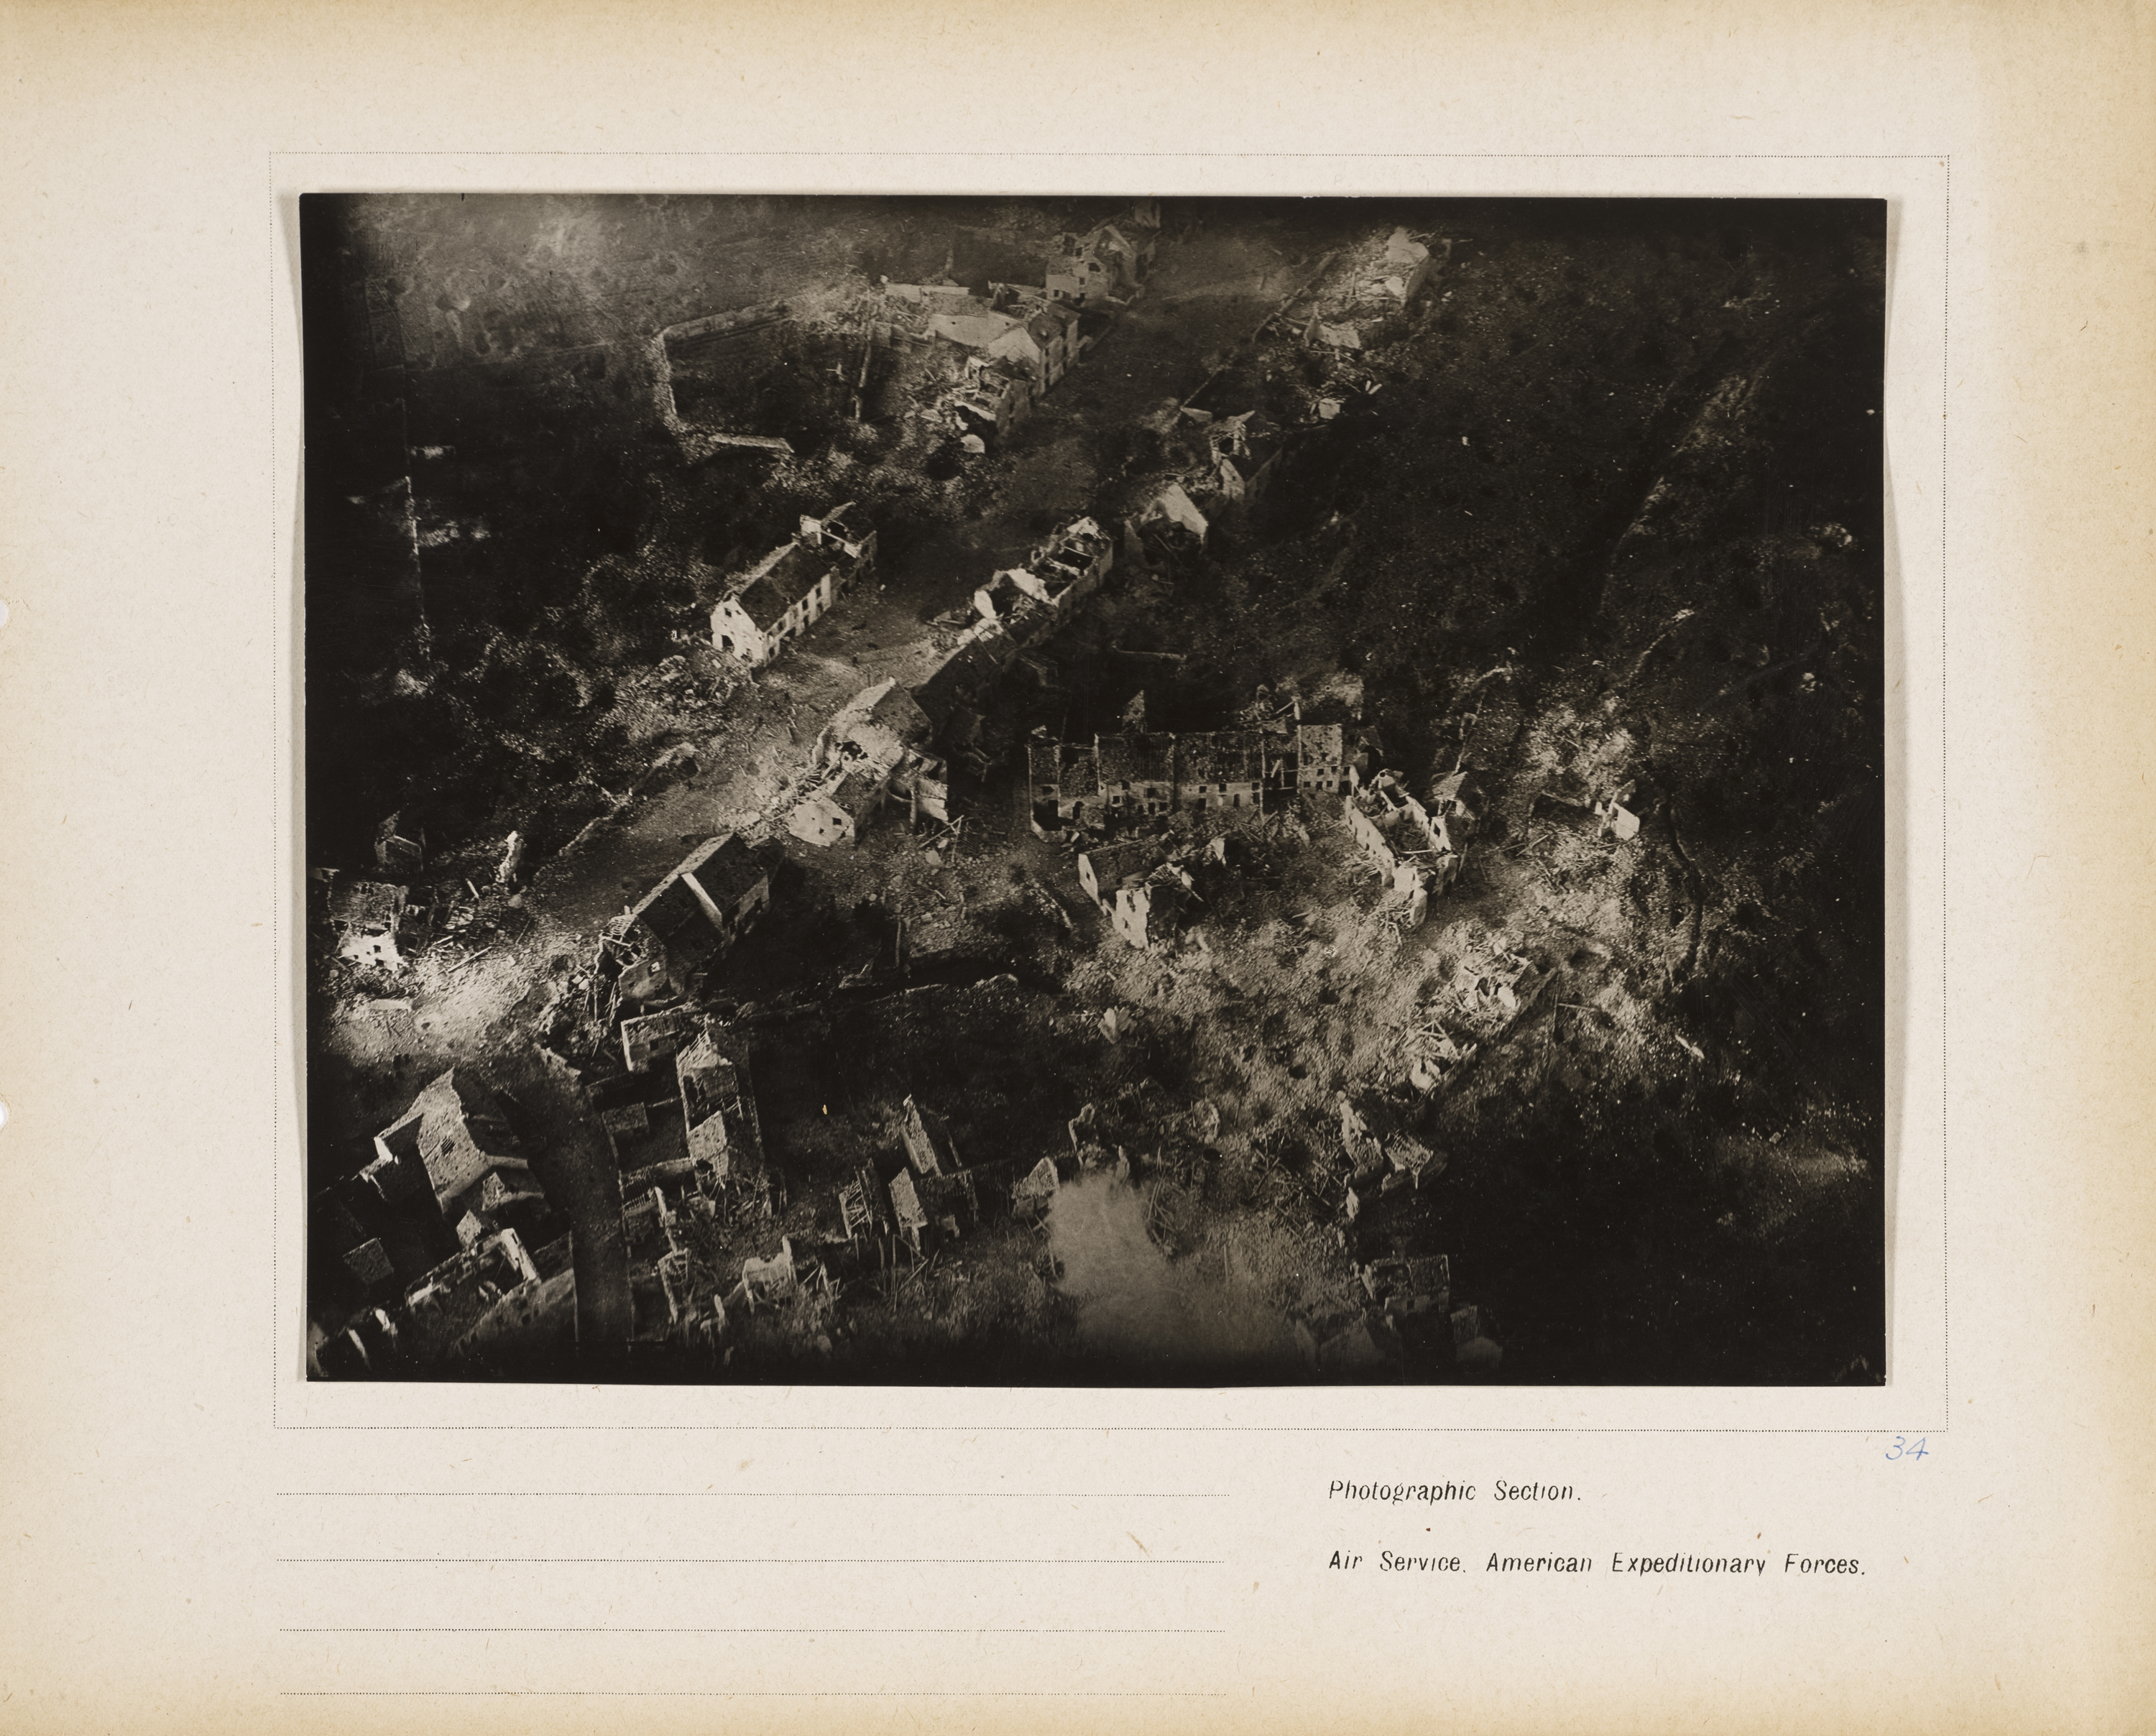 Gelatin silver print, from loose-leaf album of aerial photographs from the Photographic Section, Air Service, American Expeditionary Forces, World War I . The Art Institute of Chicago, gift of William Kistler. © 2014 The Estate of Edward Steichen/Artists Rights Society (ARS), New York.